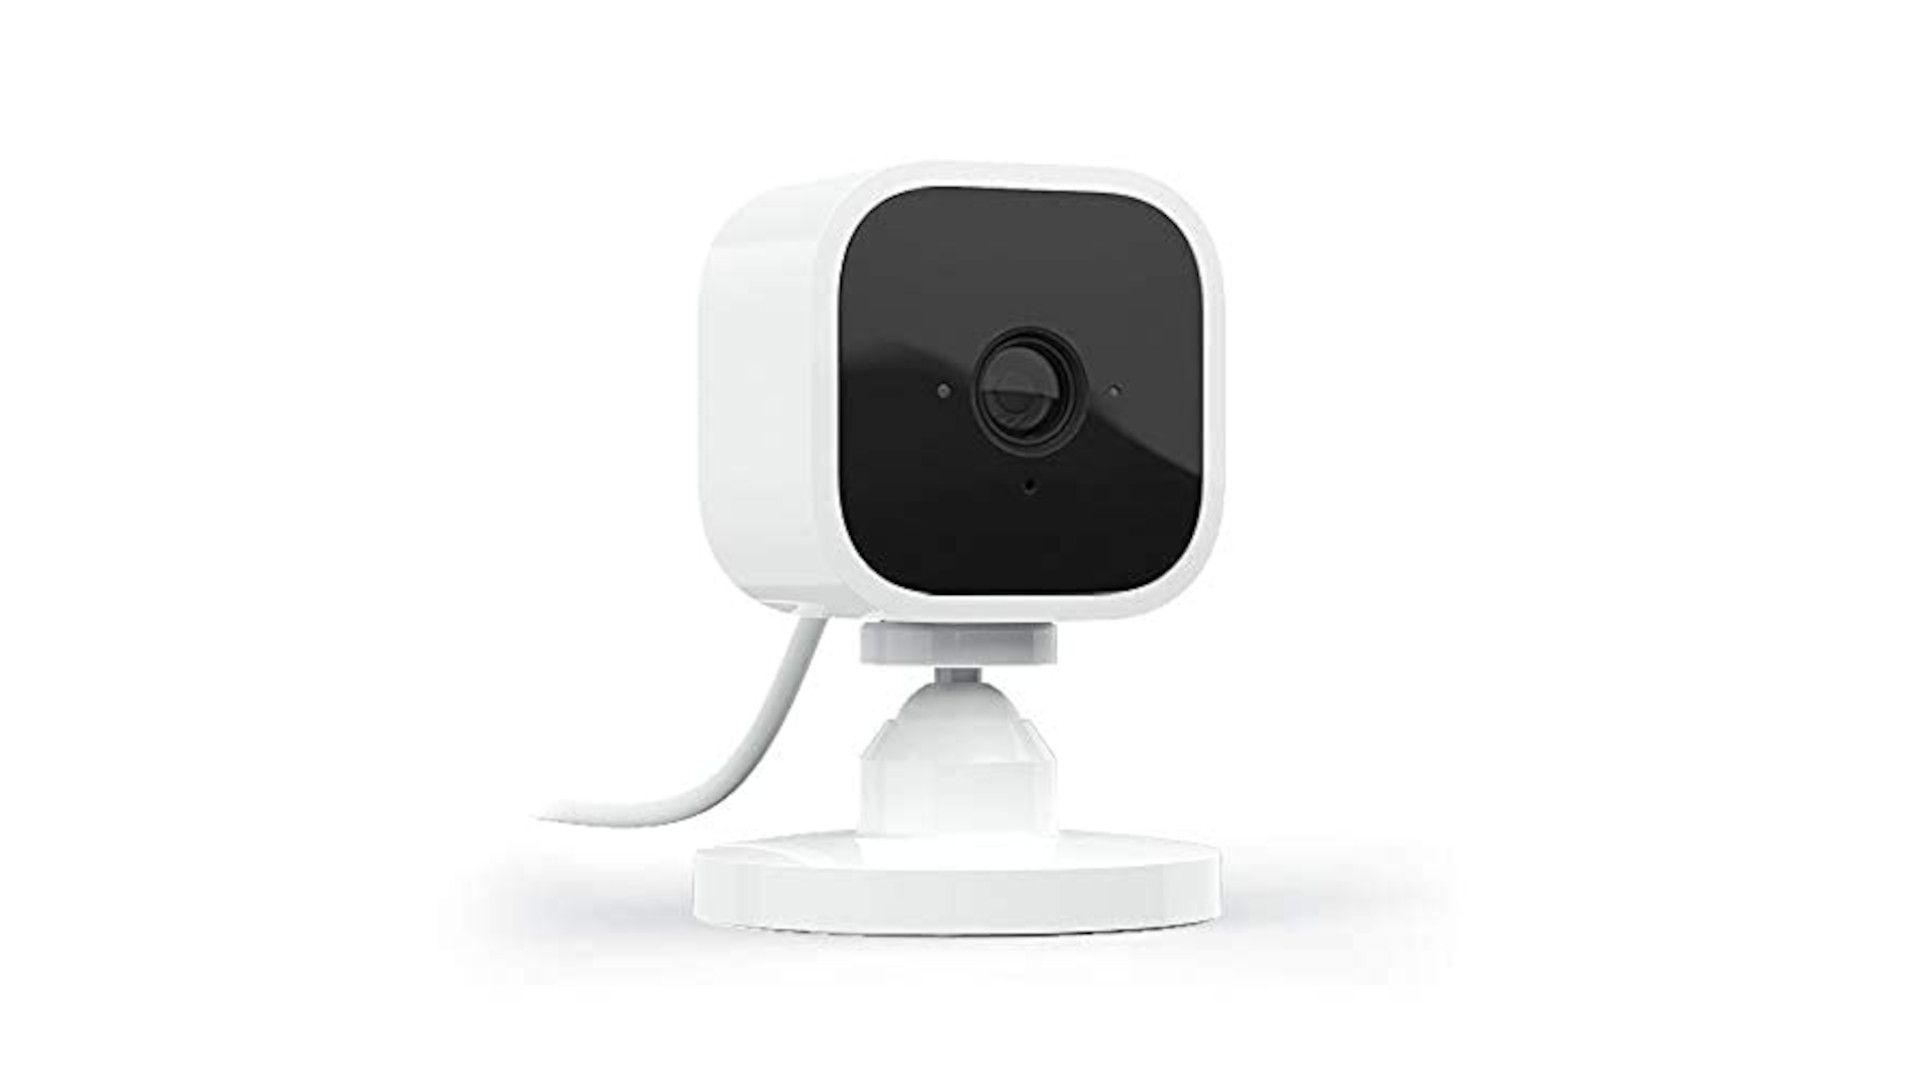 A Blink Mini camera is shown on a white background.